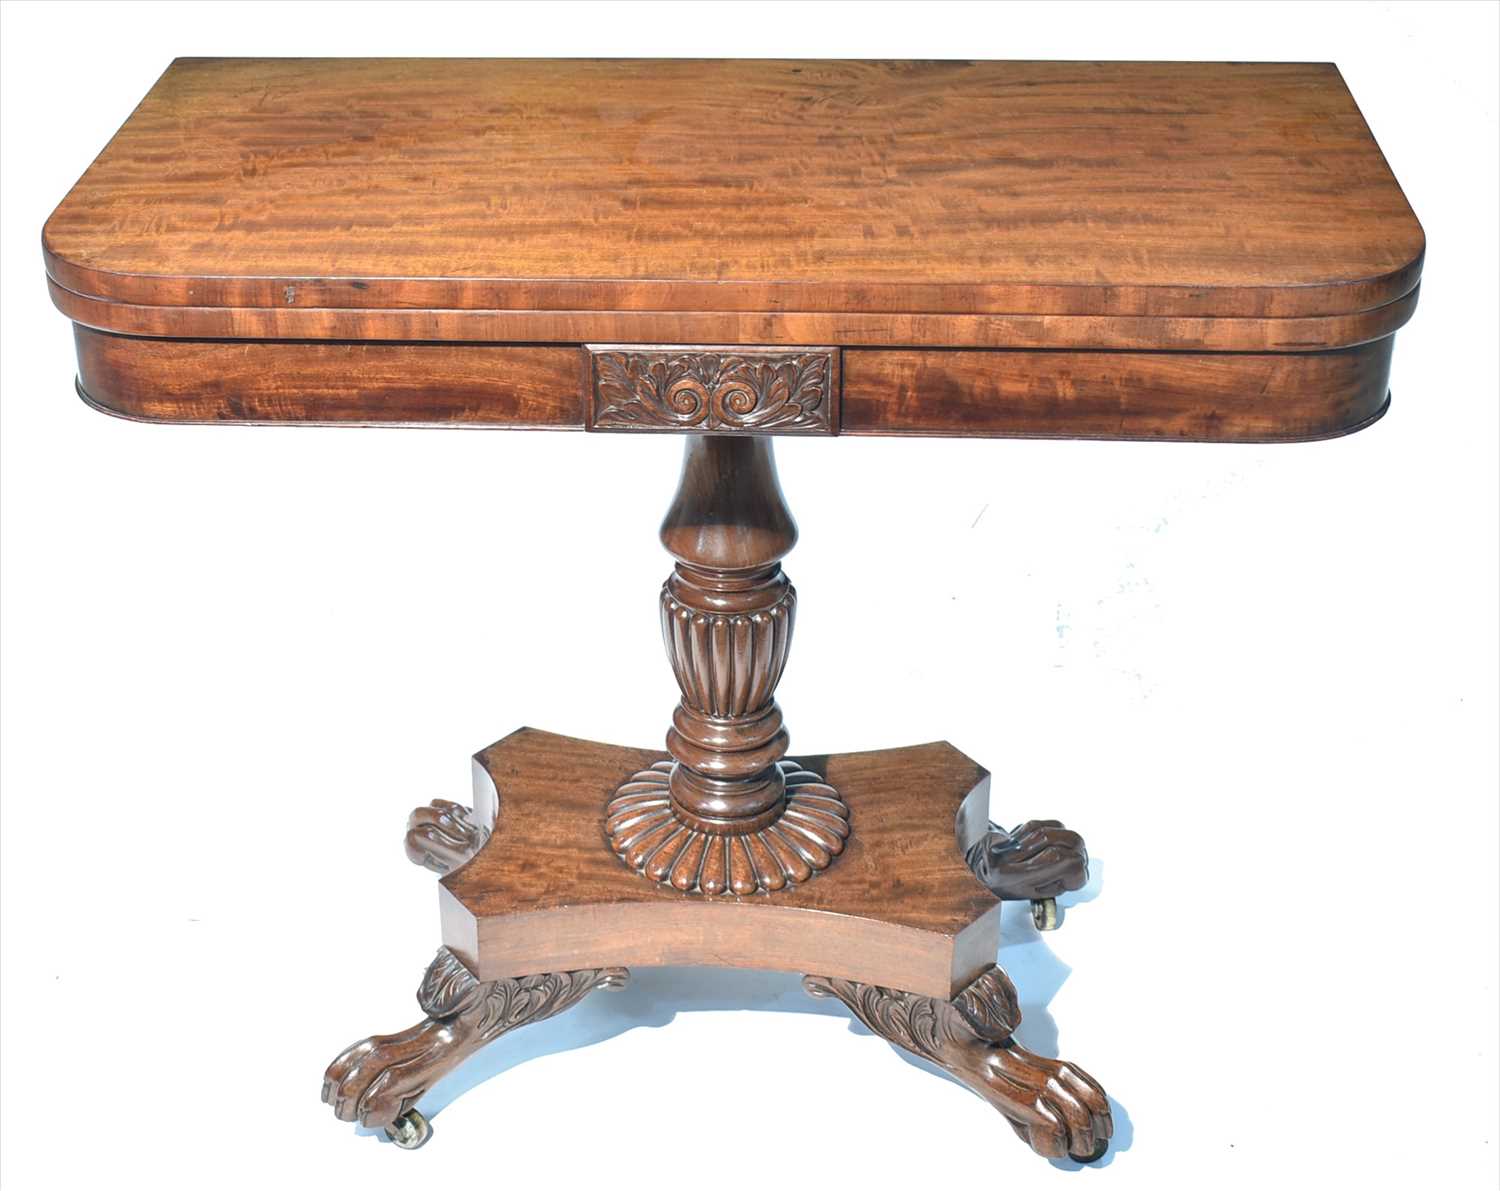 Lot 1231 - Gillows, Lancaster: A fine quality 19th Century 'fiddle-back' mahogany tea table